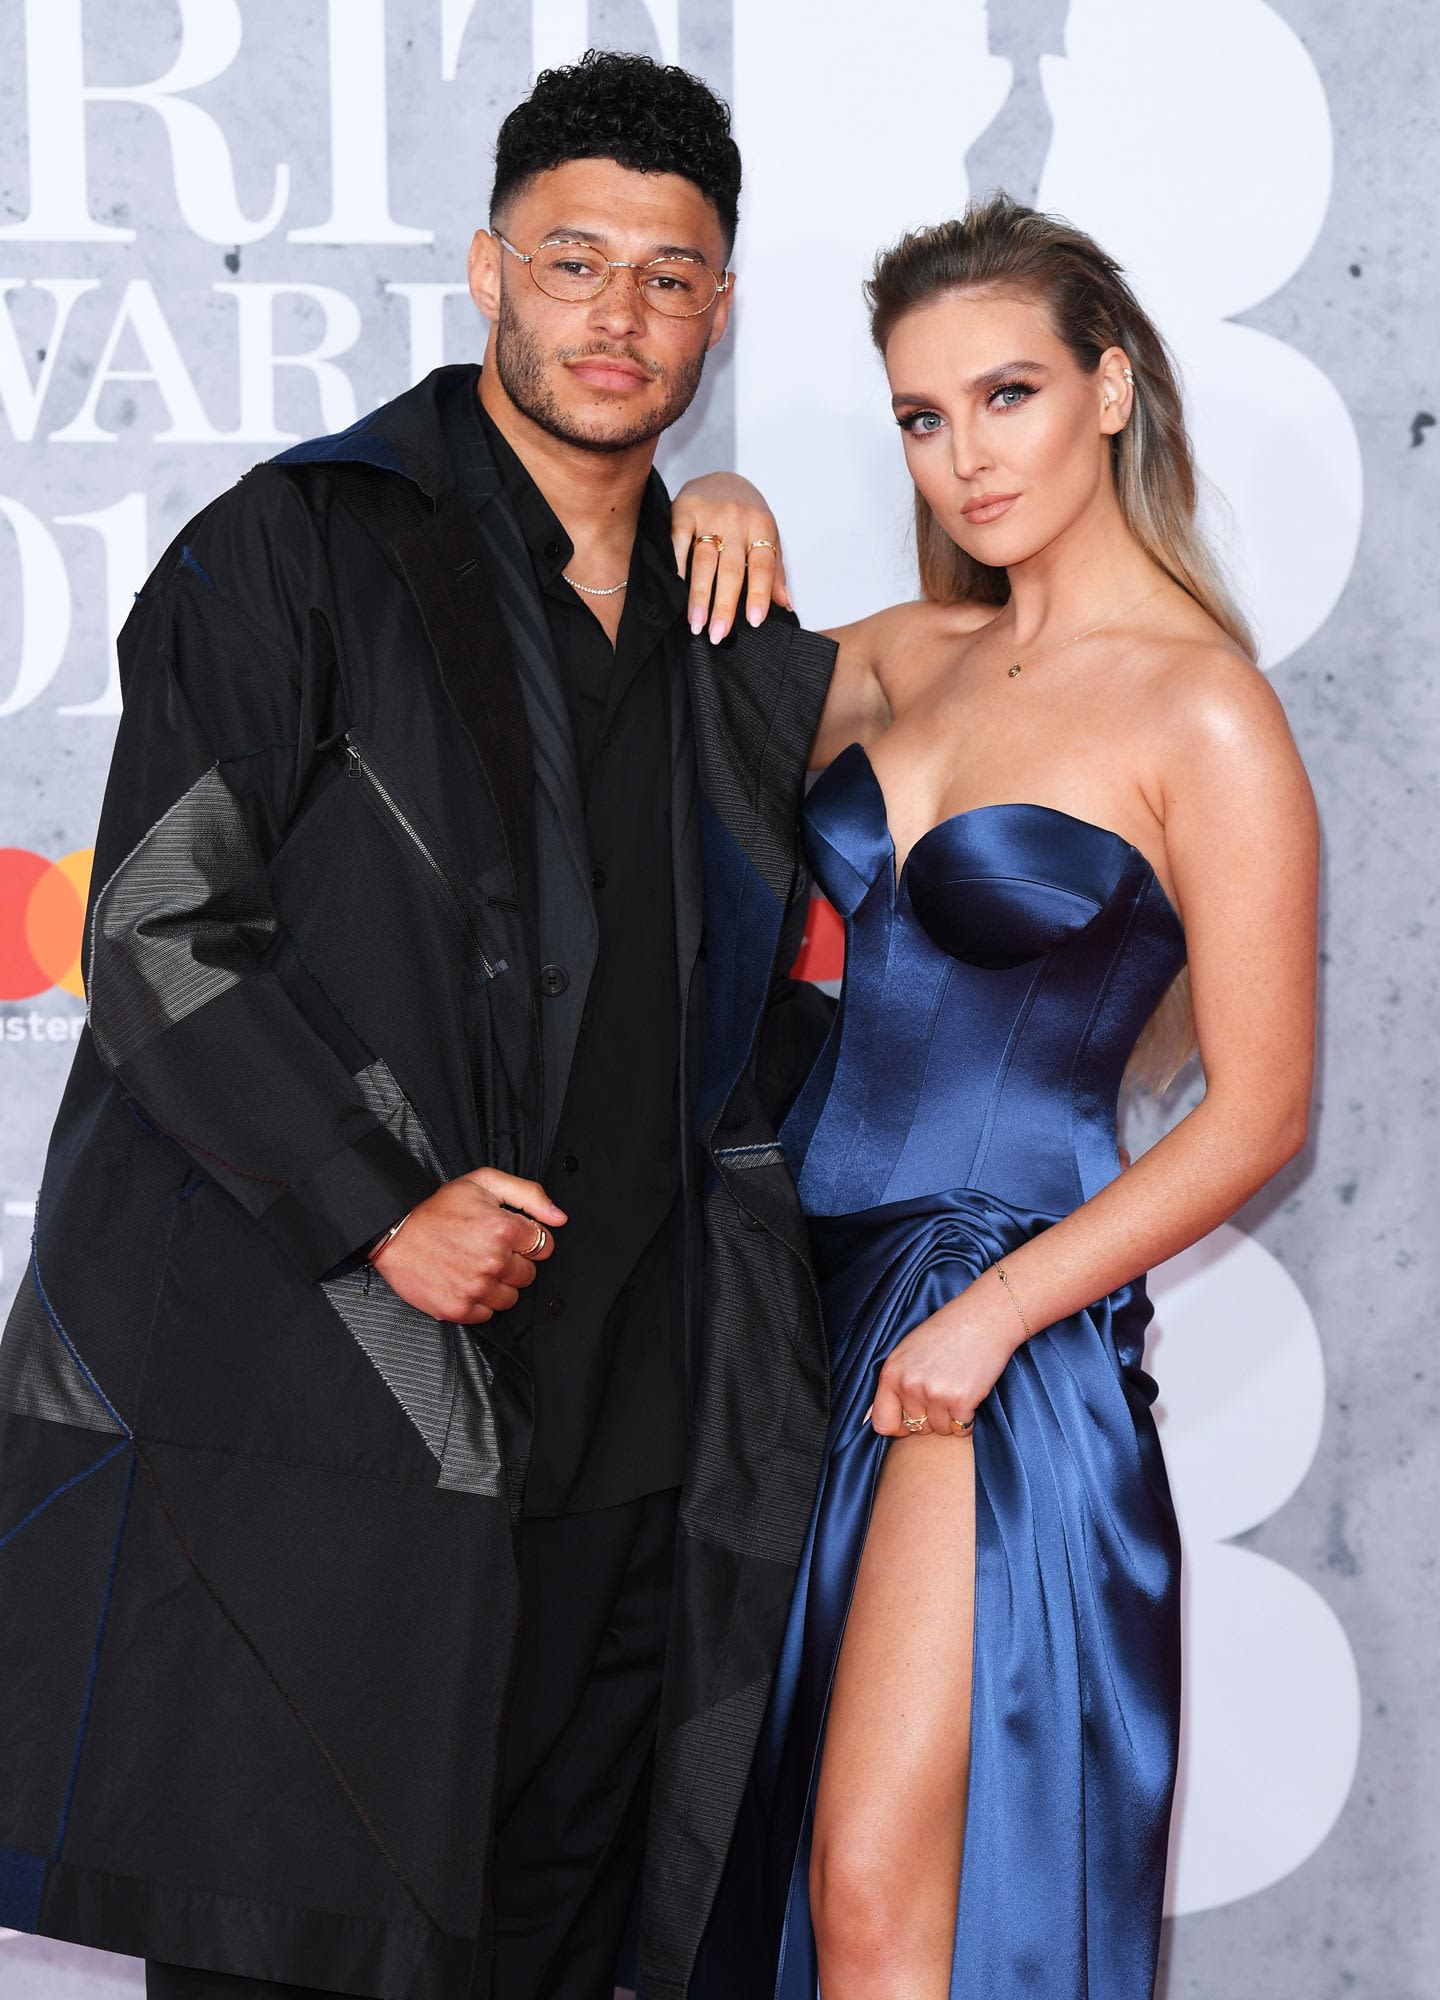 Perrie Edwards Says Fiancé Alex Oxlade-Chamberlain Made Her Realize Past Relationships Were ‘Toxic’